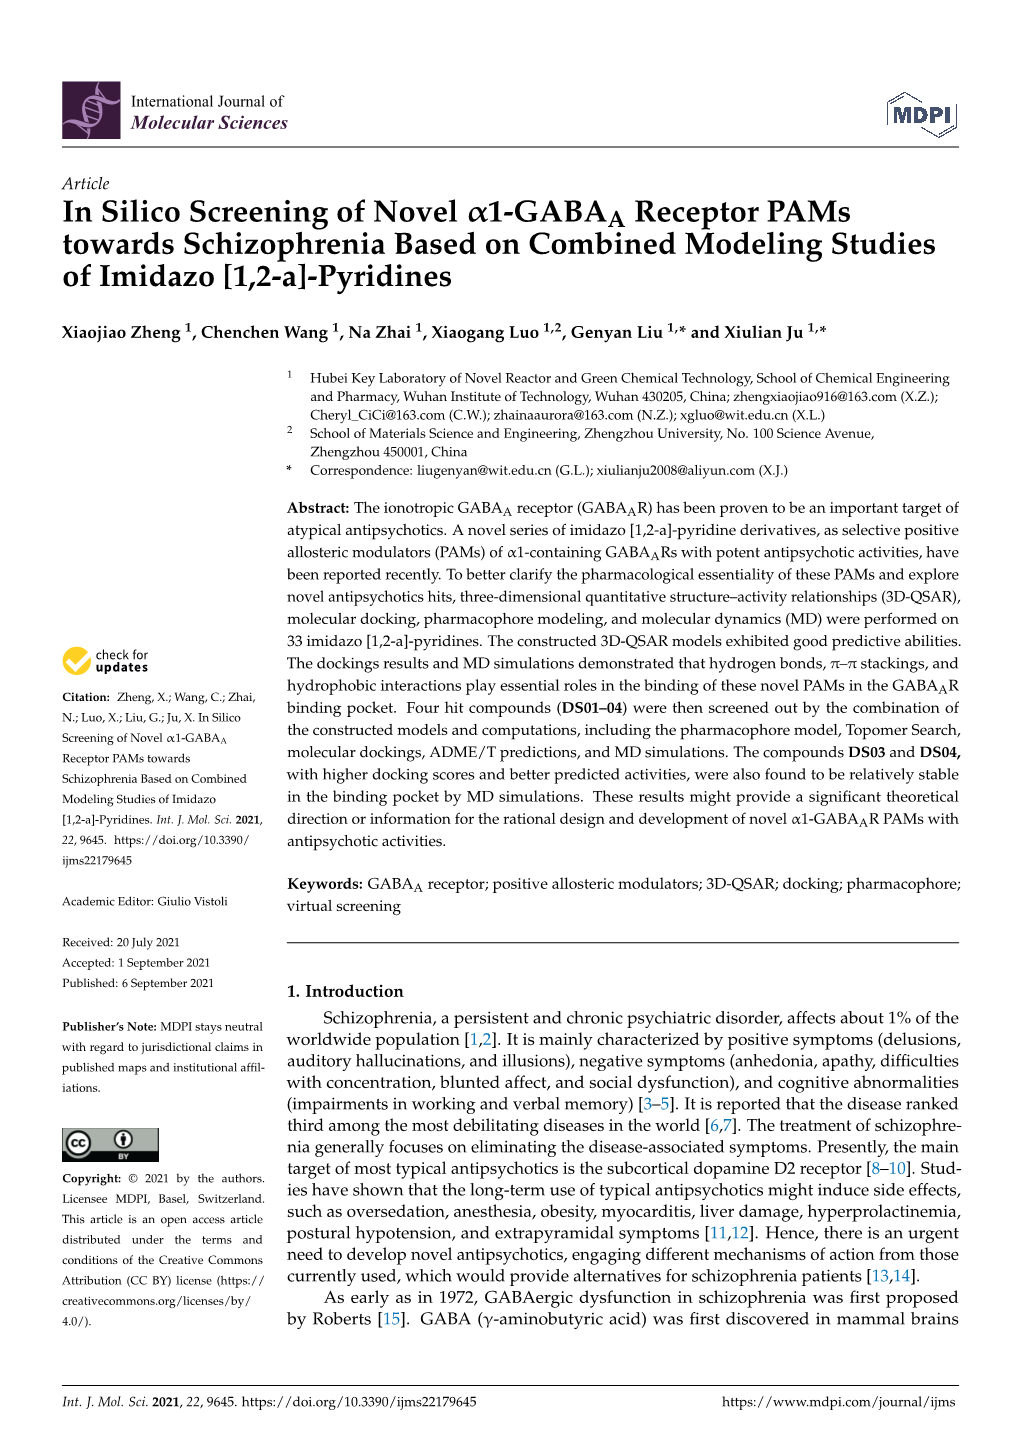 In Silico Screening of Novel Α1-GABAA Receptor Pams Towards Schizophrenia Based on Combined Modeling Studies of Imidazo [1,2-A]-Pyridines